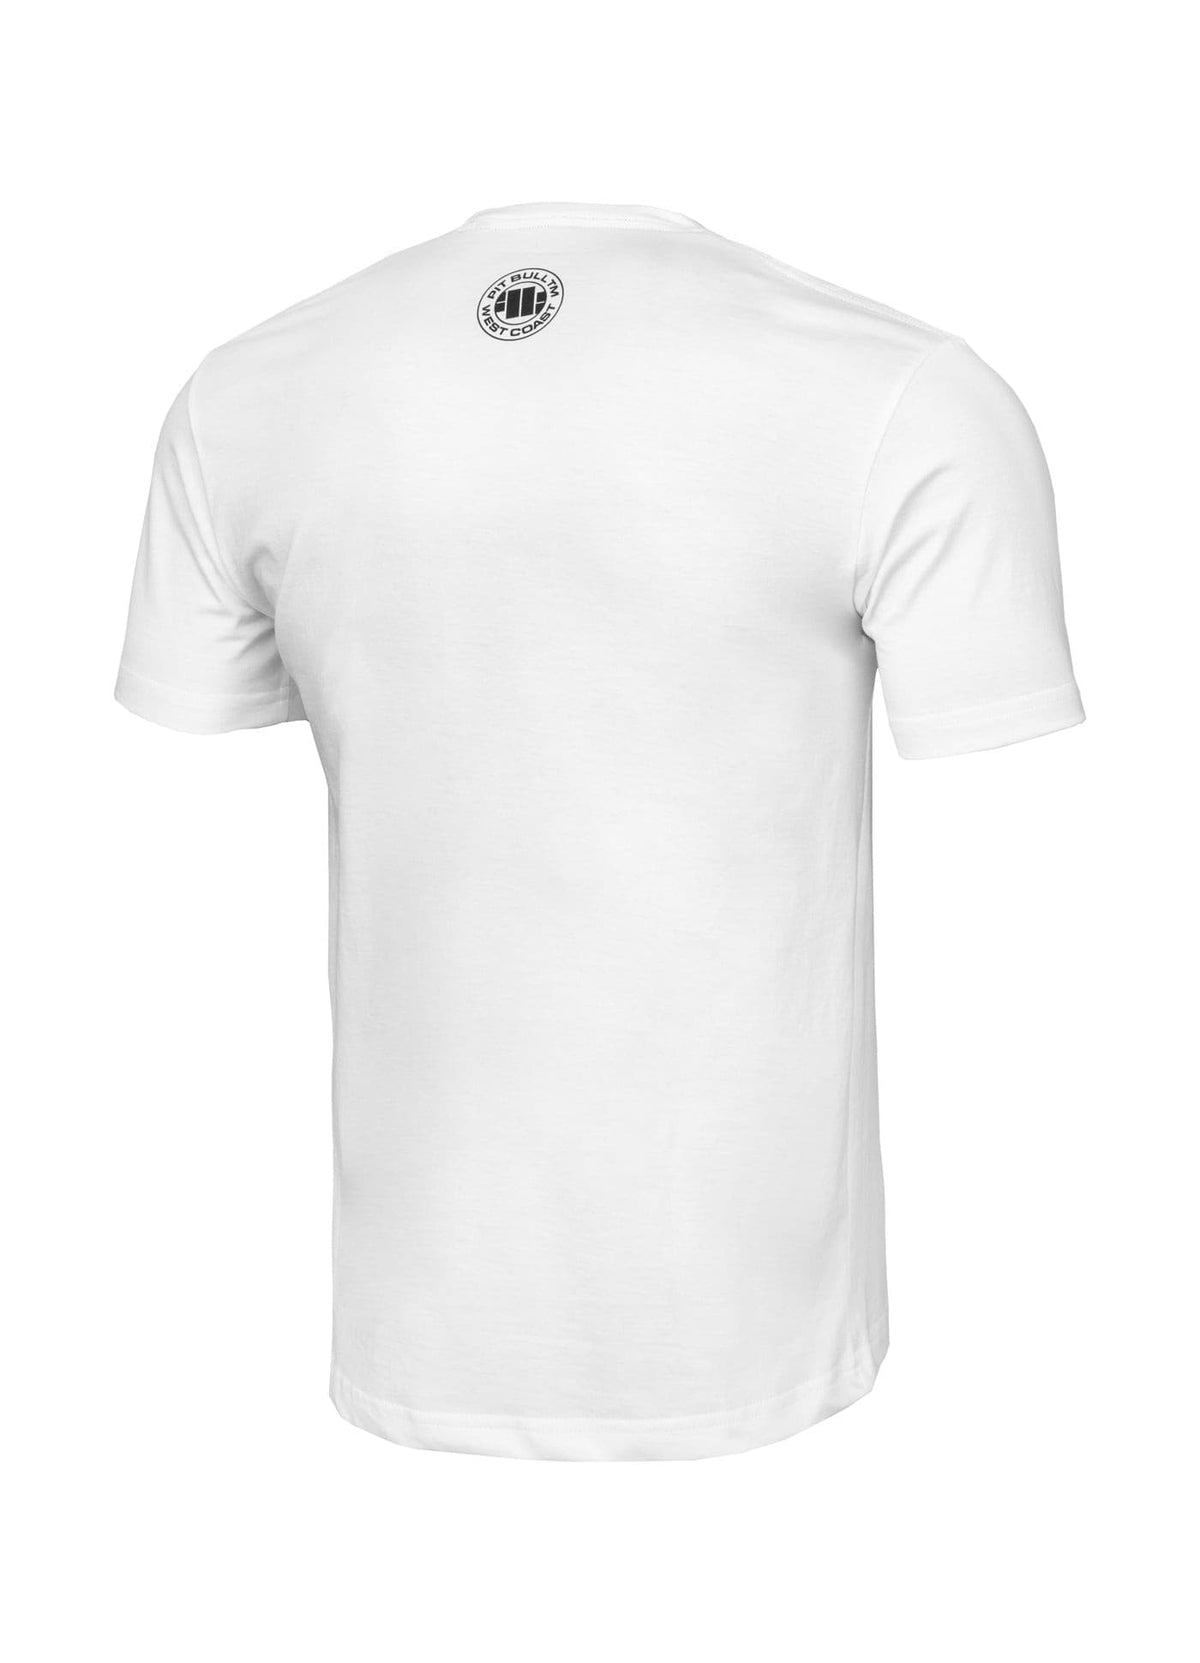 Official ADCC White T-Shirt.